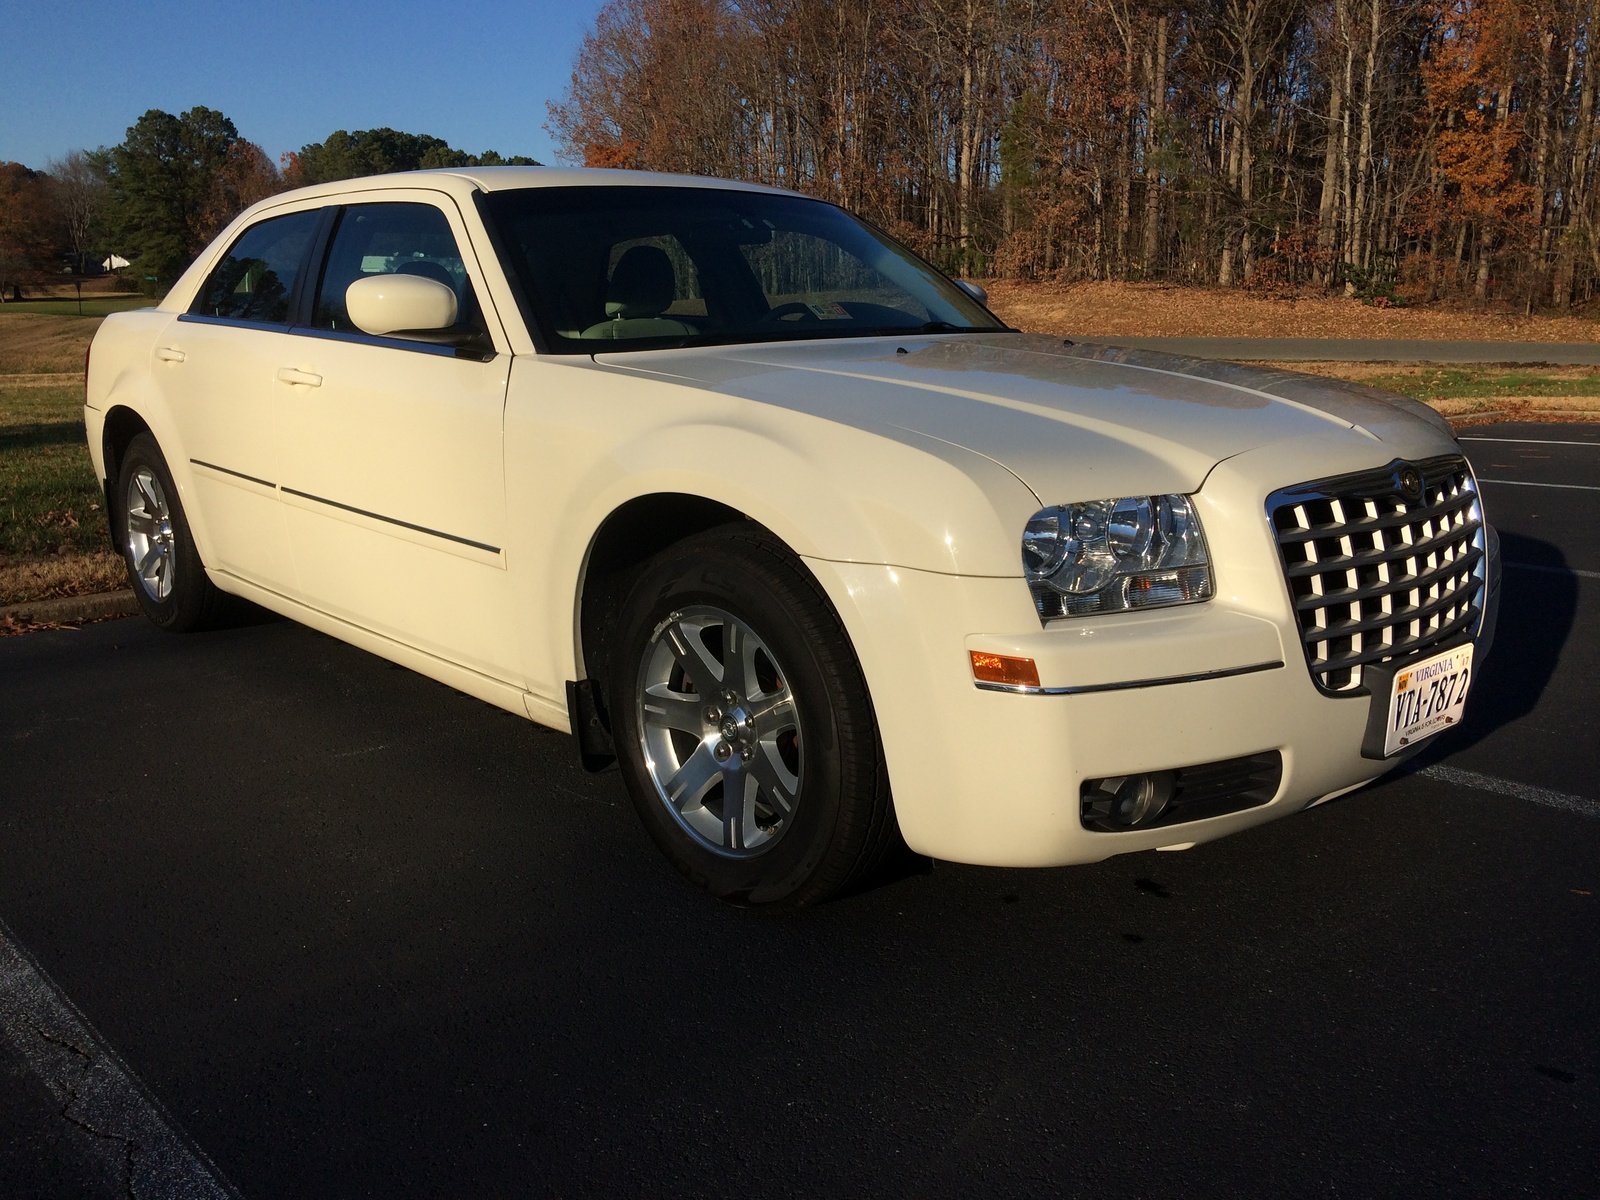 2006 Chrysler 300 Test Drive Review